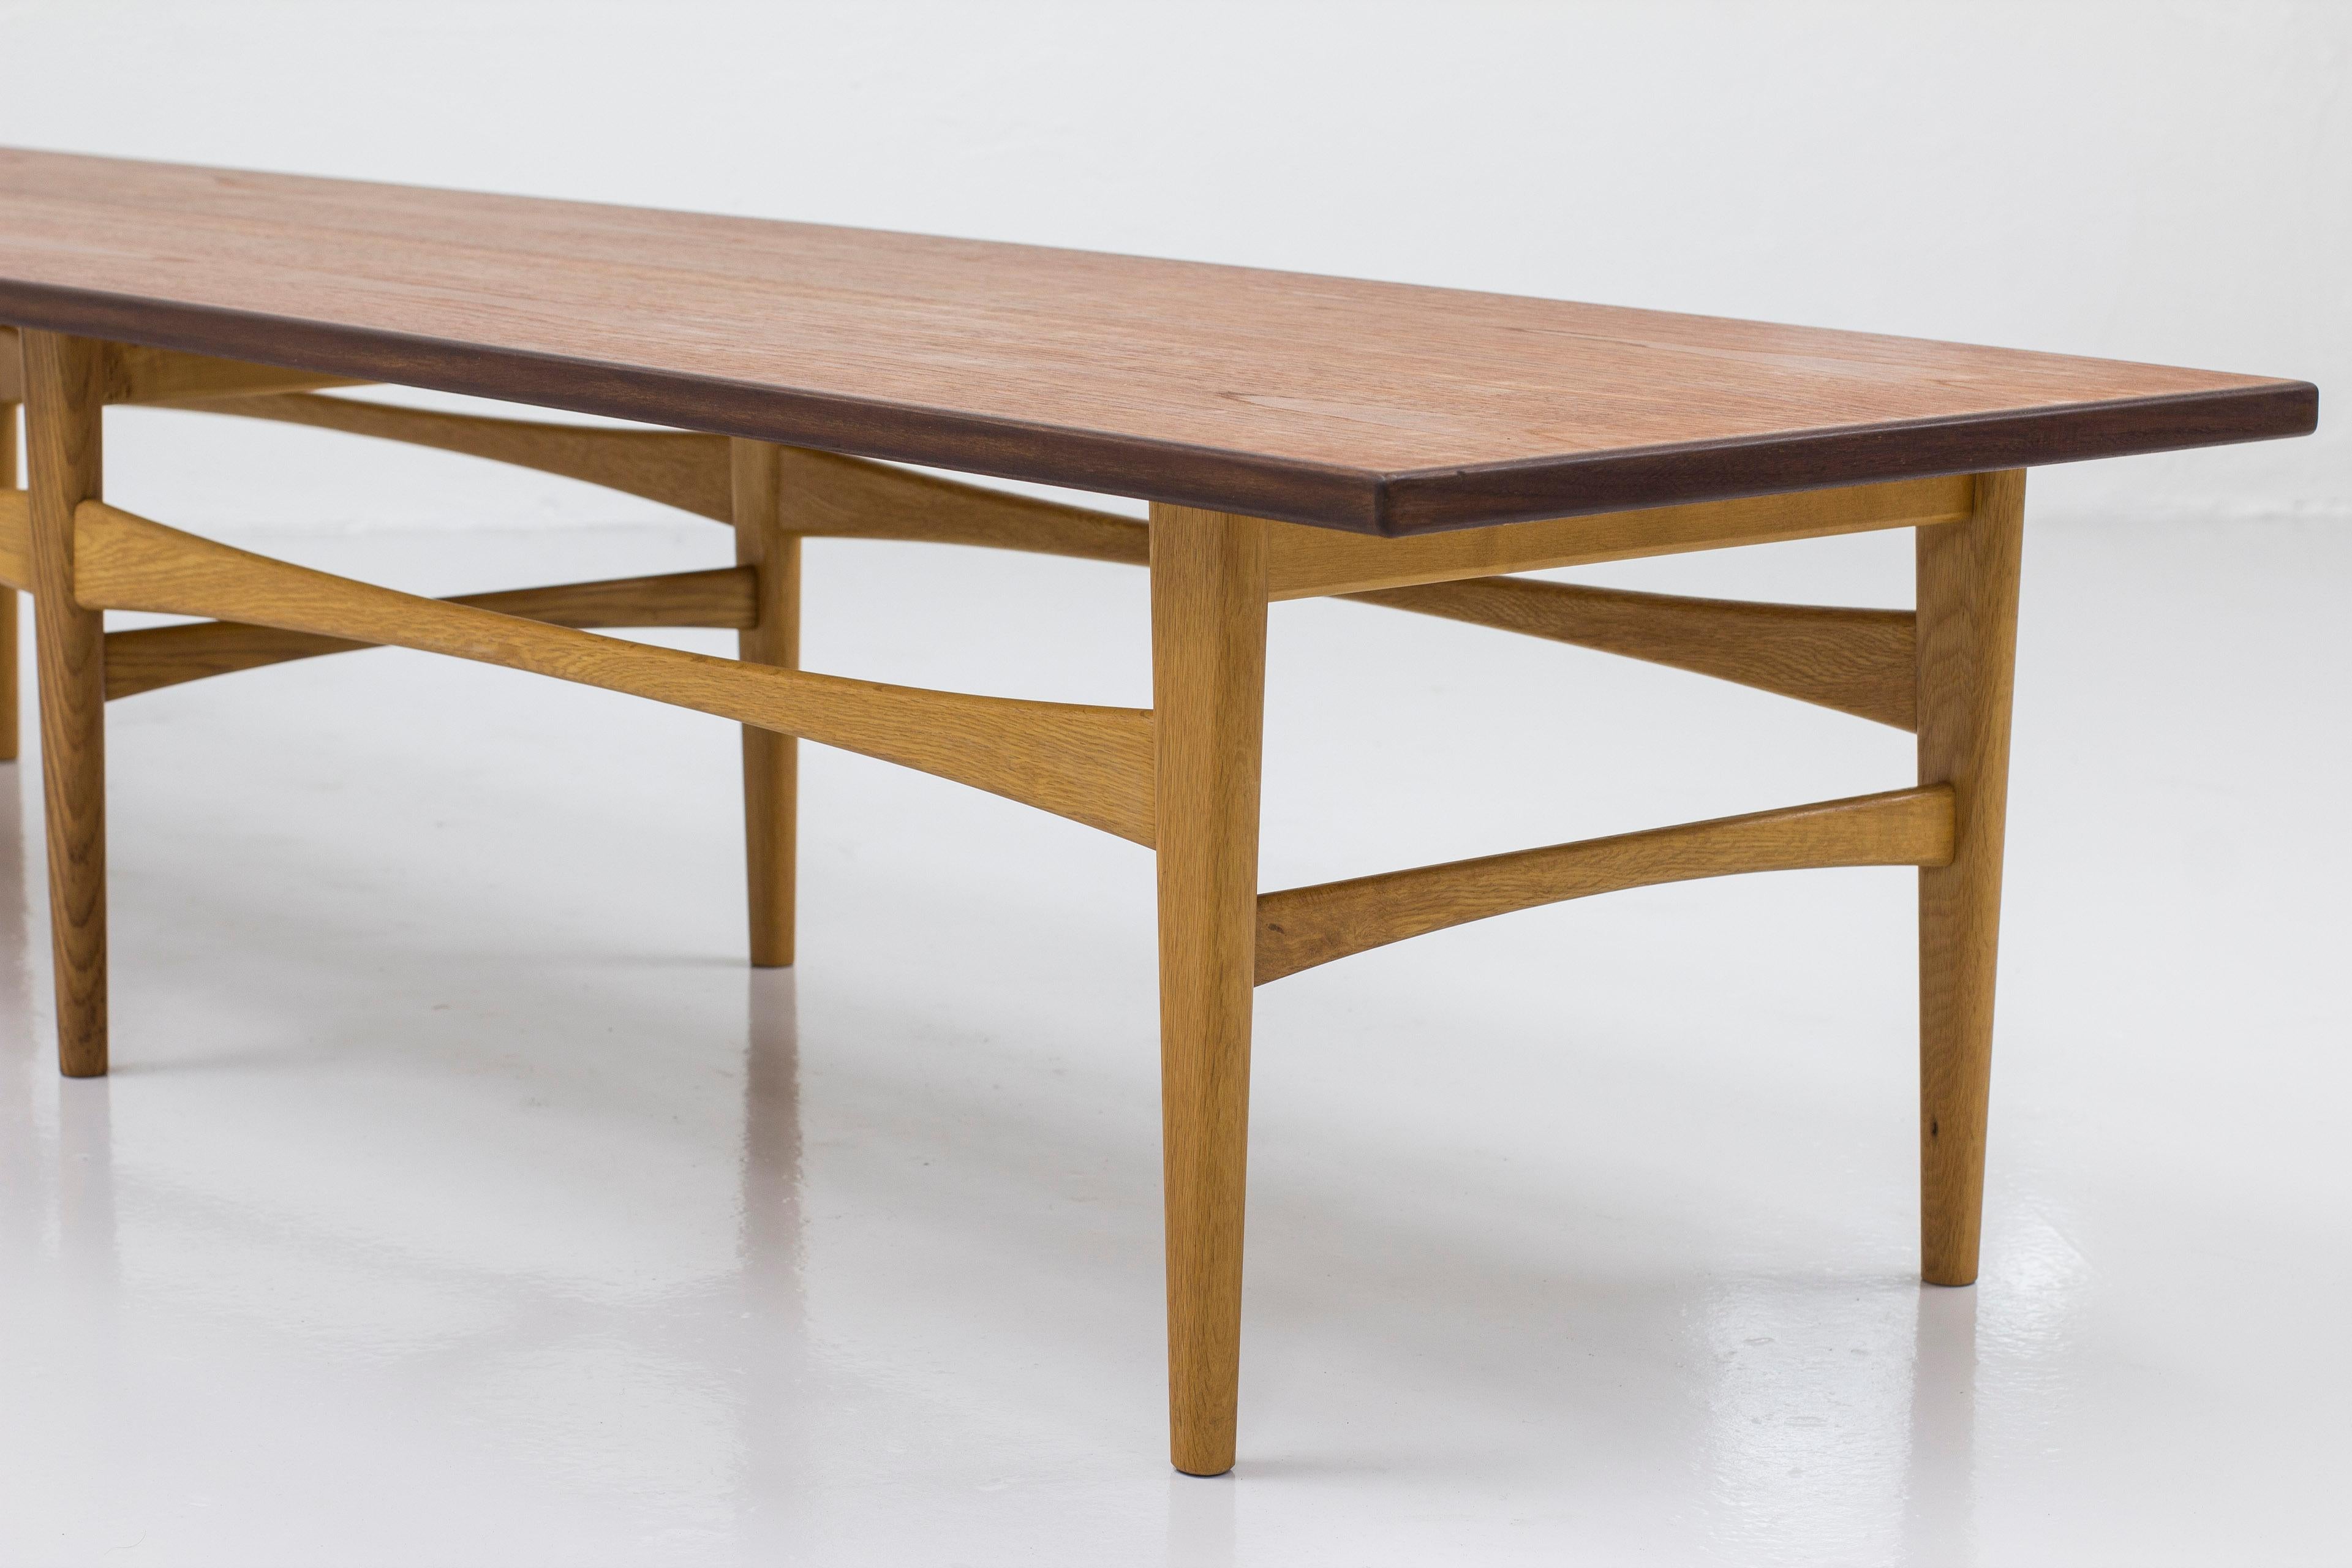 Teak and Oak Bench or Table by Eric Johansson for Abra, Sweden, 1950s In Good Condition For Sale In Hägersten, SE